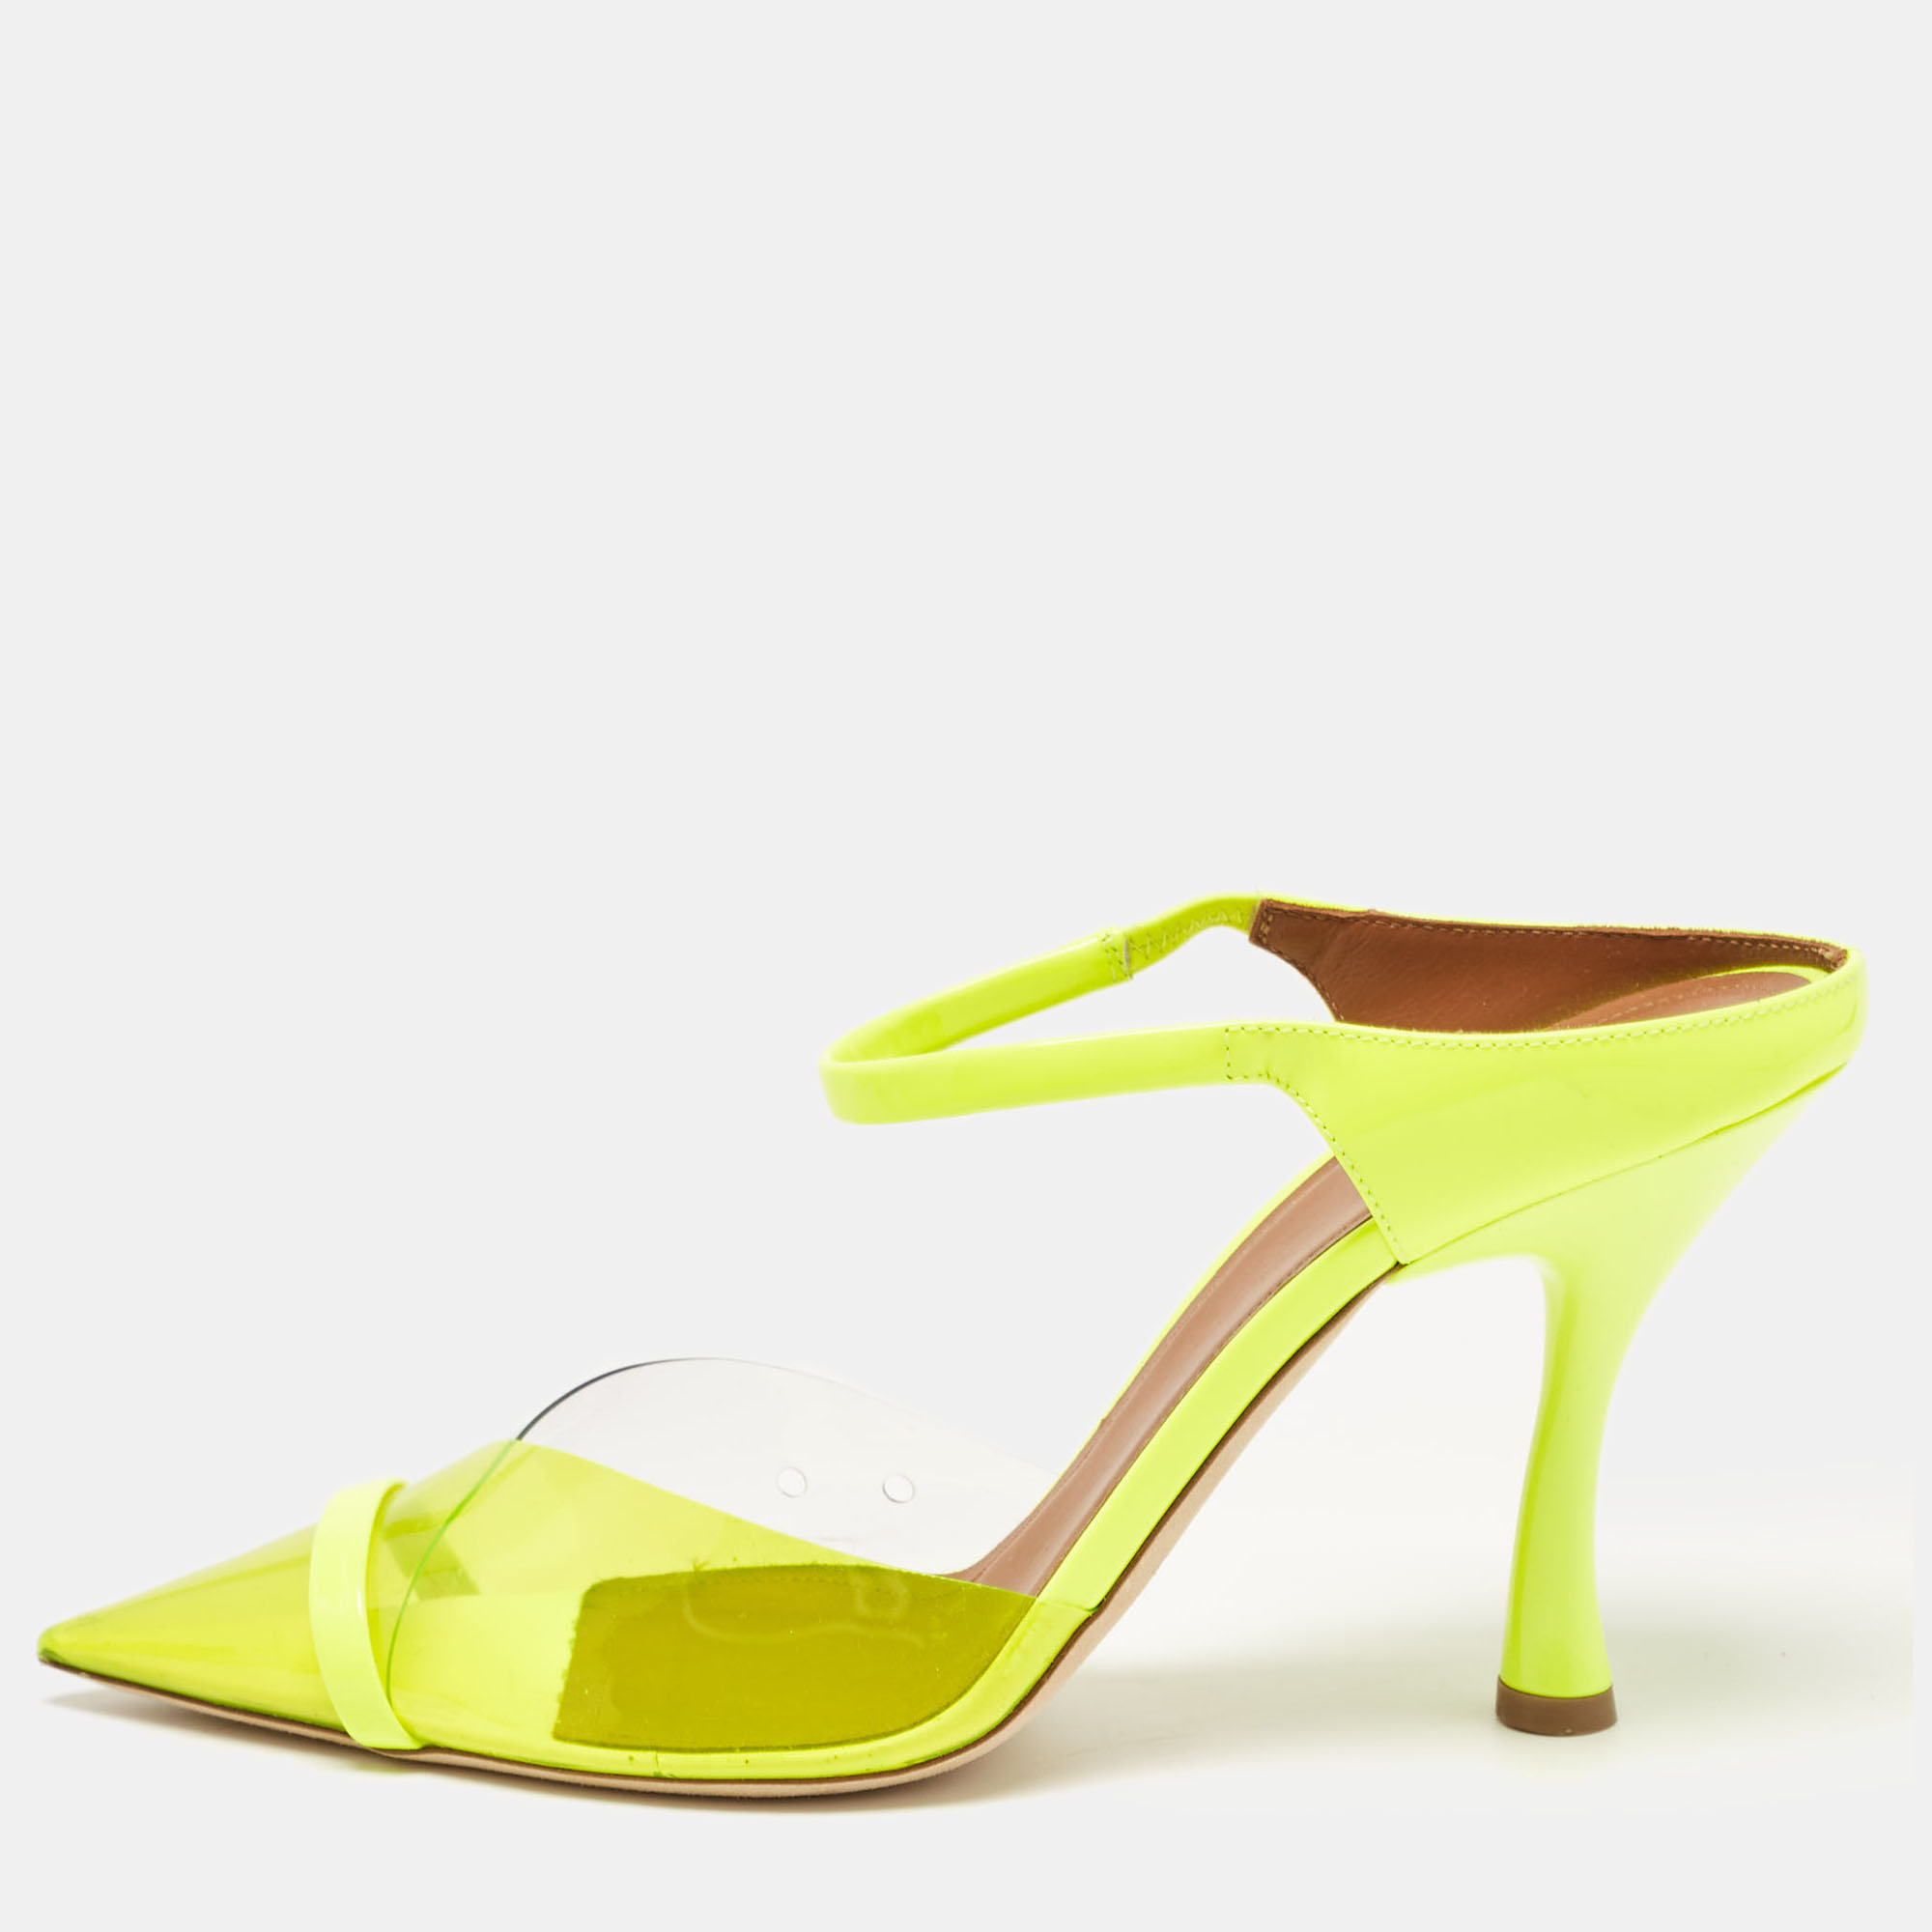 Malone souliers neon yellow iona heel mules size 40.5